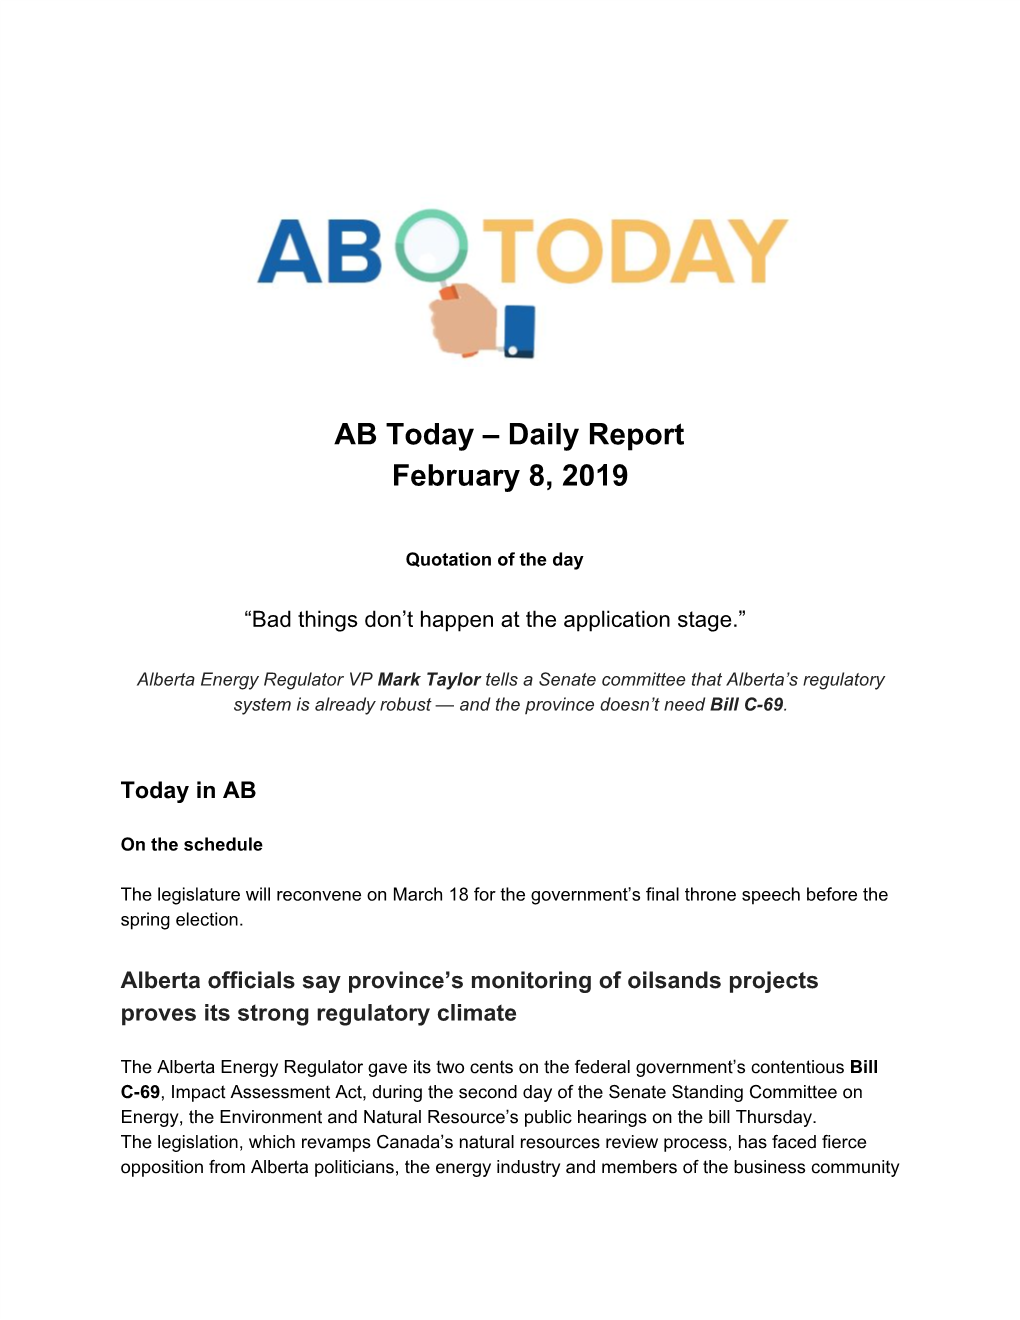 AB Today – Daily Report February 8, 2019